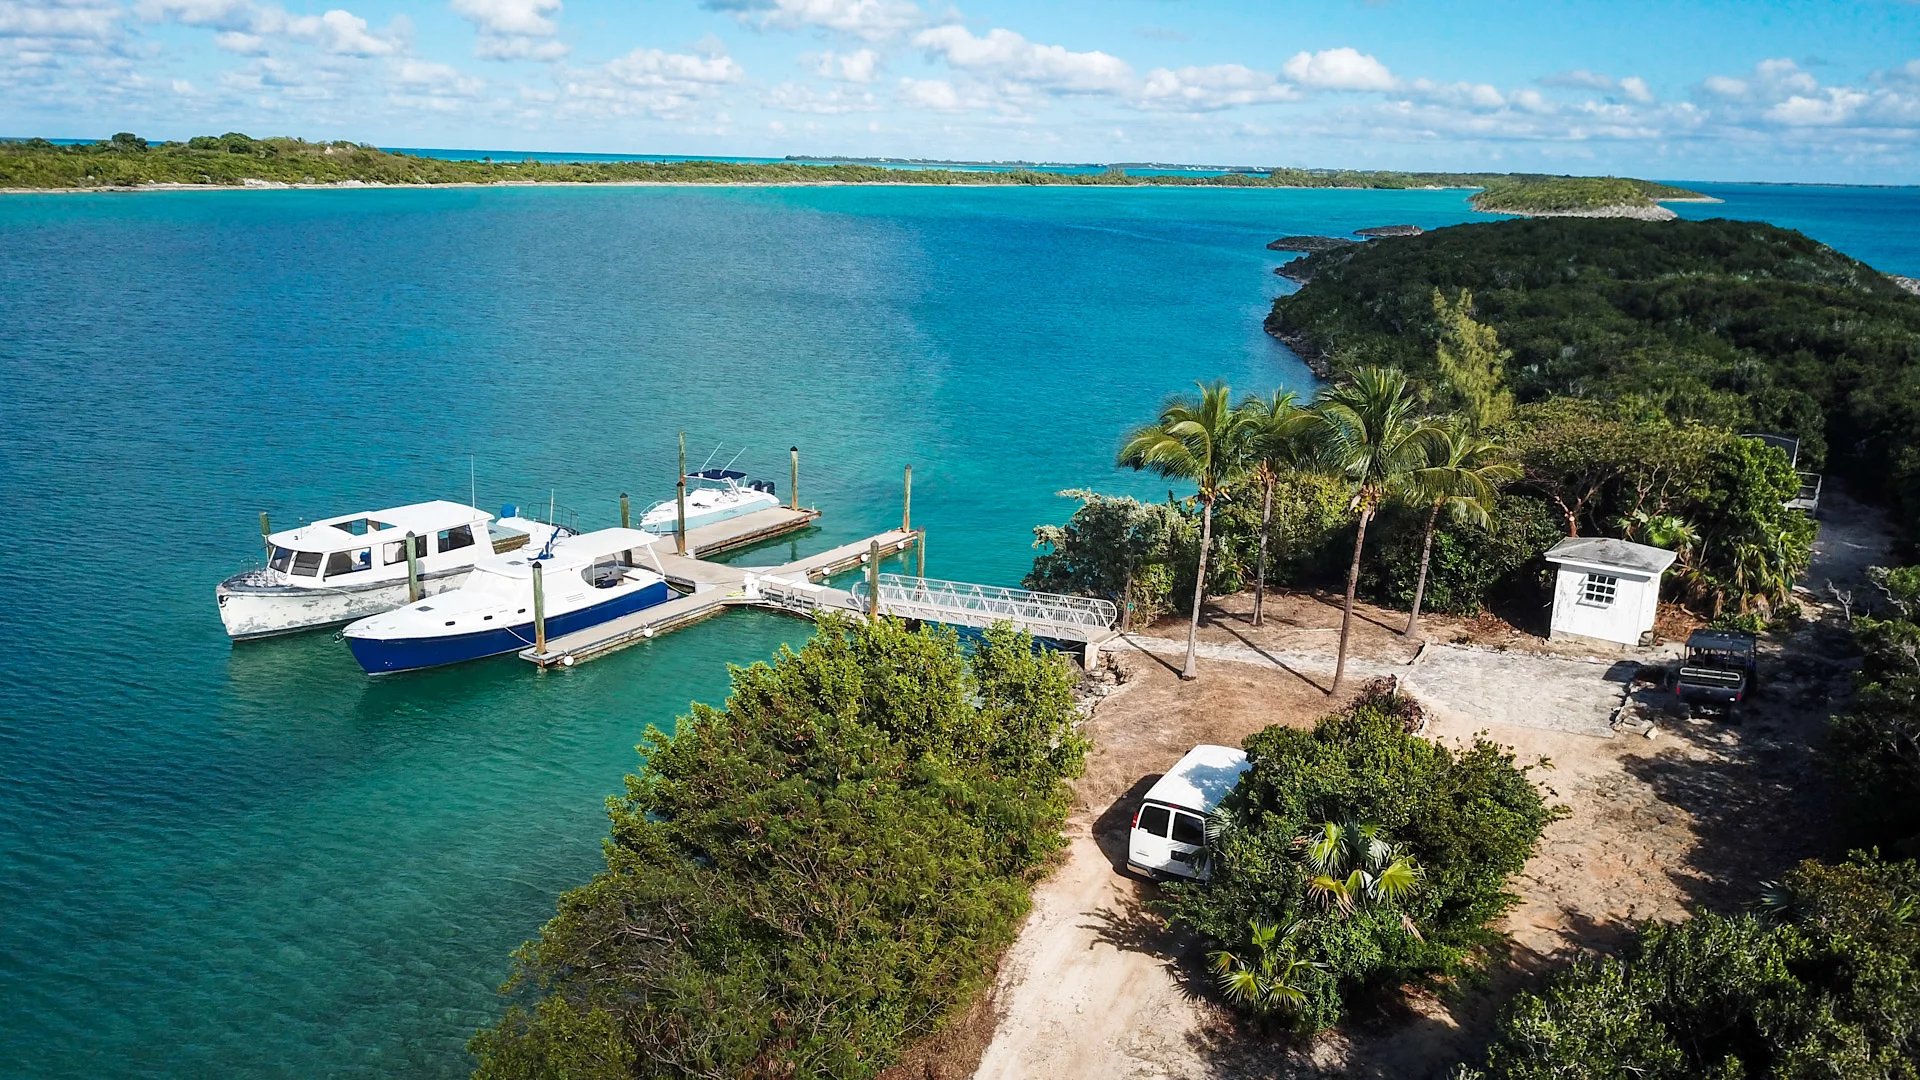 royal island, the perfect private island opportunity - mls 51444 image36